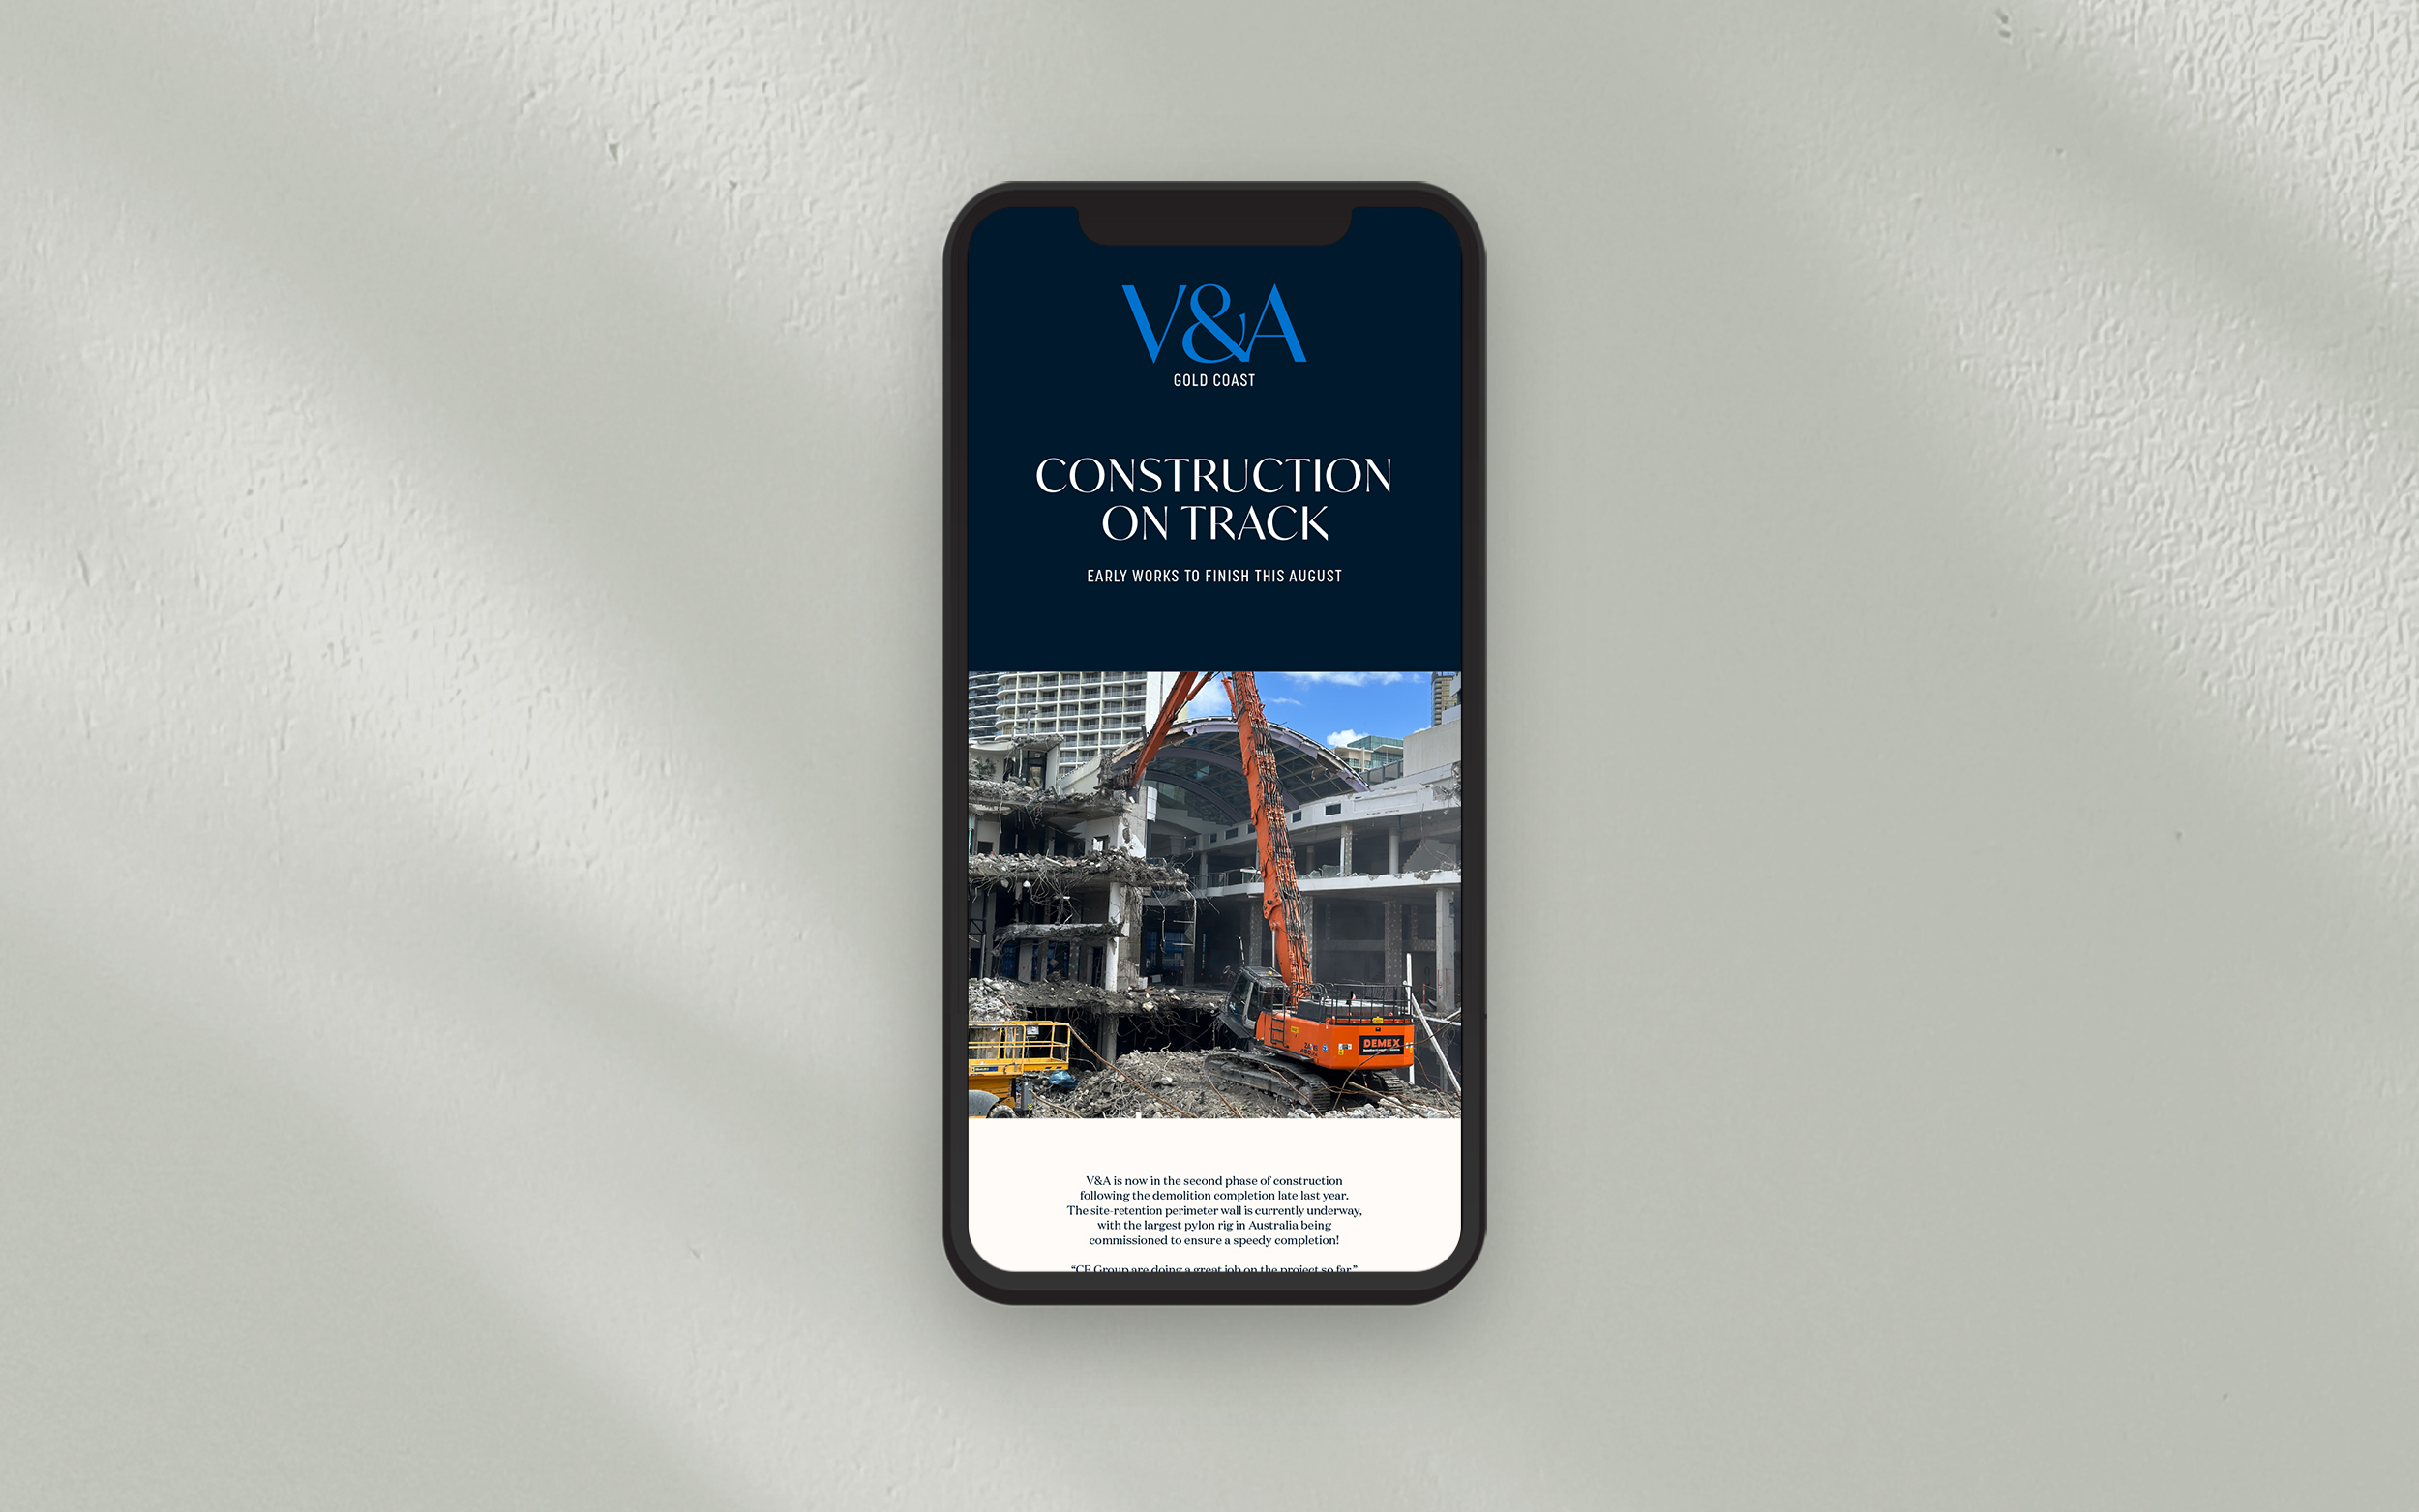 EDM providing a construction update for V&A, displayed on mobile phone